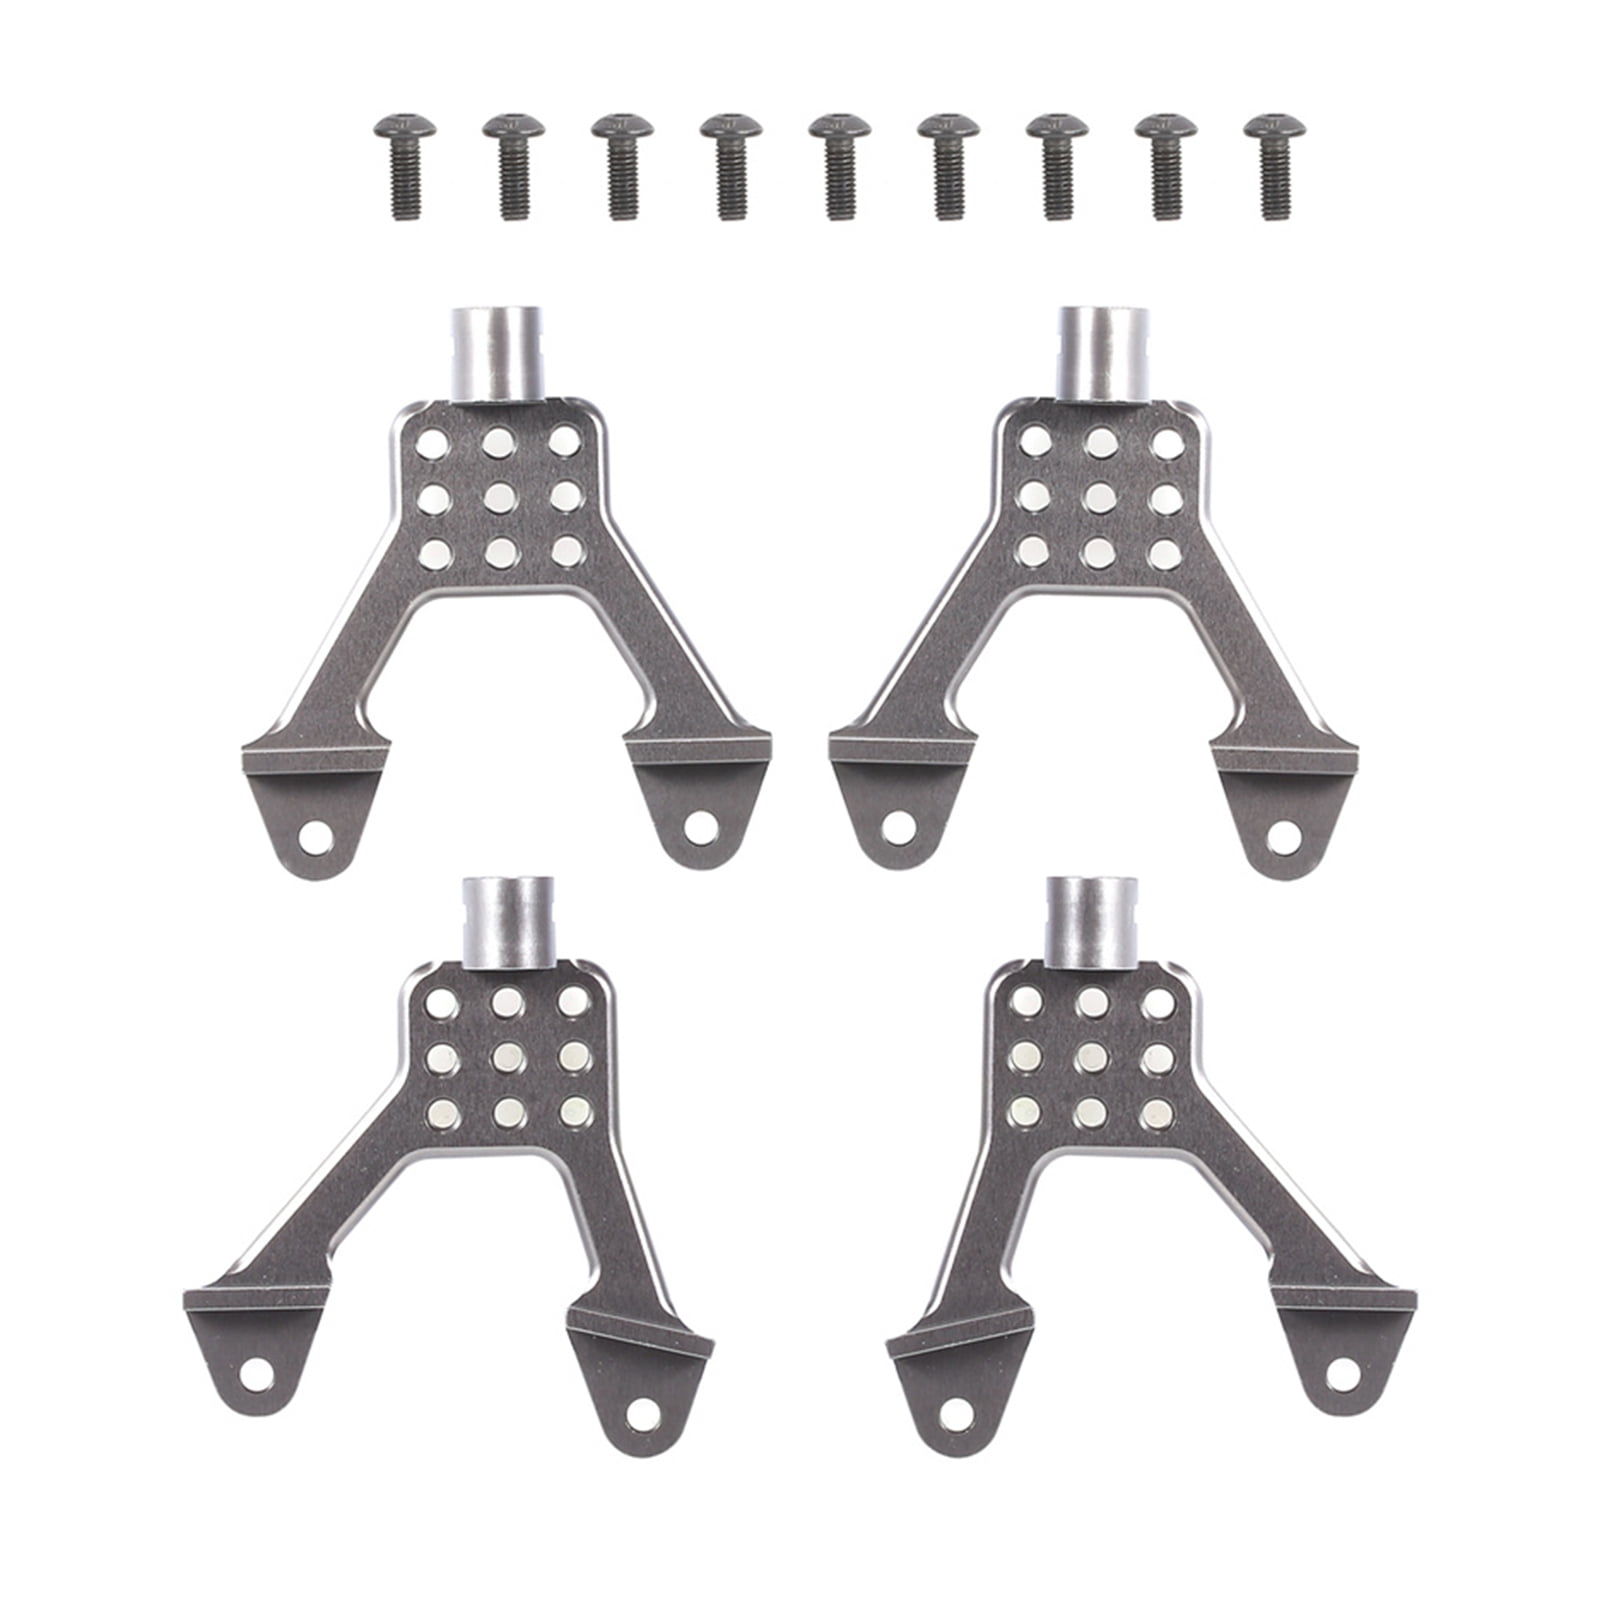 Aluminum Front & Rear Shock Tower Hoops Absorber Bracket RC Car Shock Tower Upgrade Parts for 1/10 RC Axial SCX10 Car 